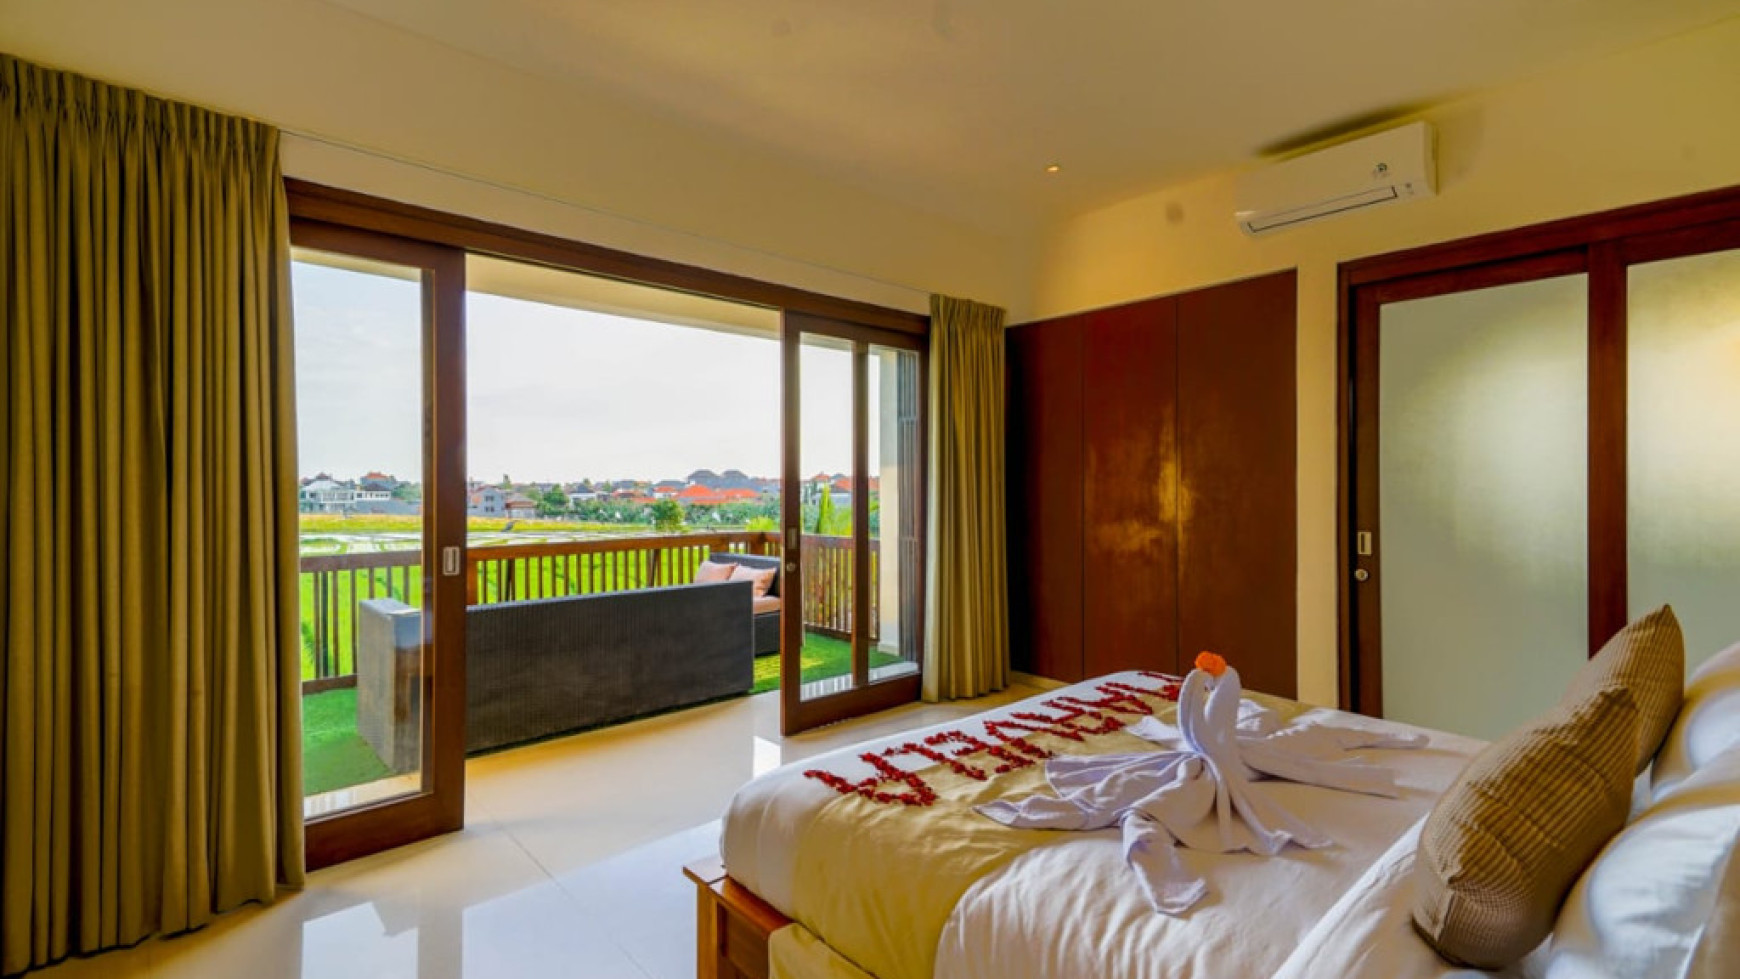 For Rent Luxury 3 Bedrooms Villa With Rice Field In Berawa Canggu